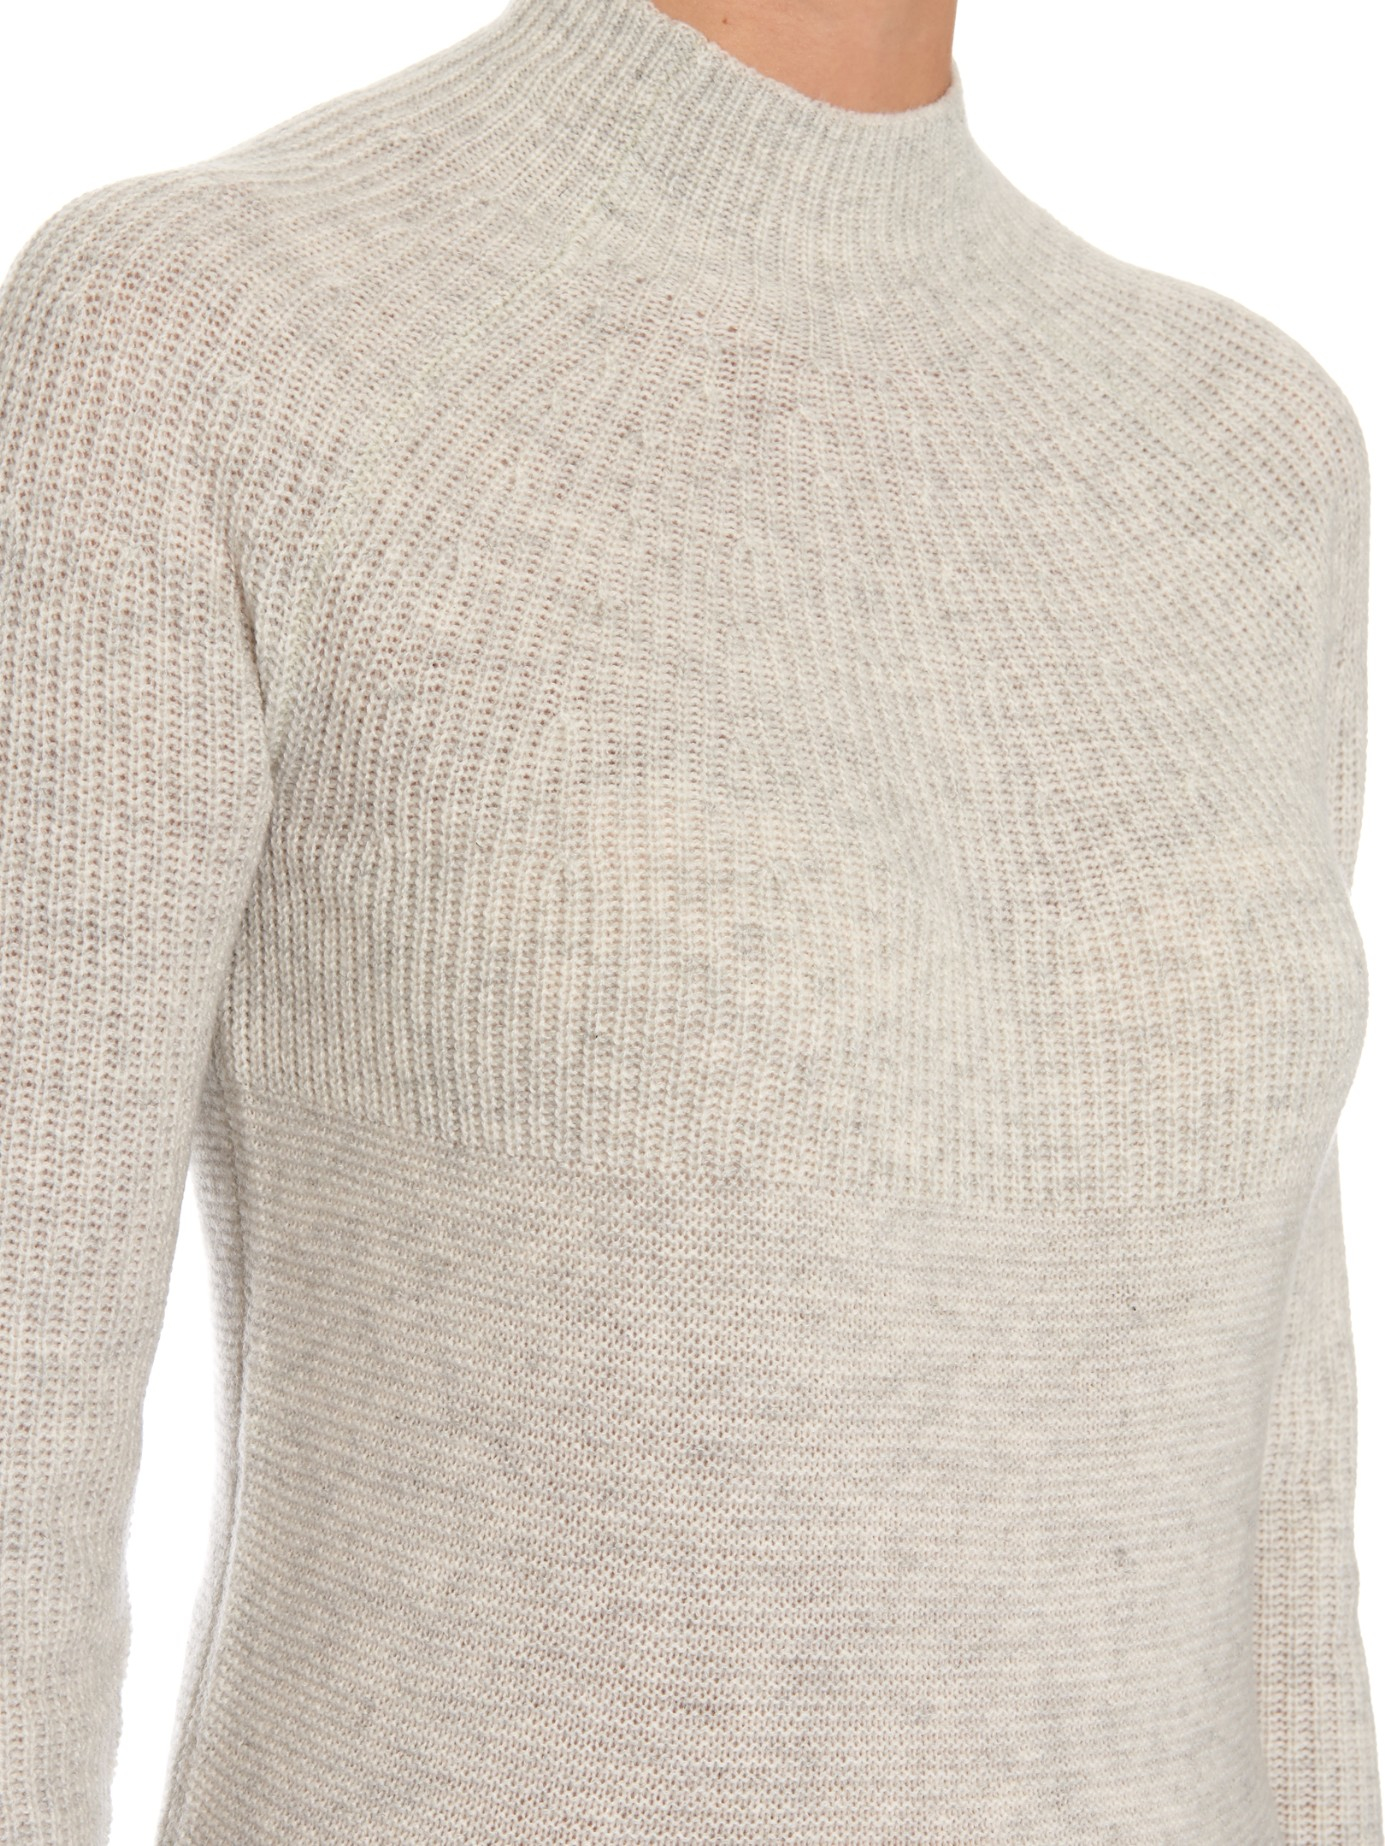 Lyst - Vince Mock-neck Cashmere Sweater in Gray